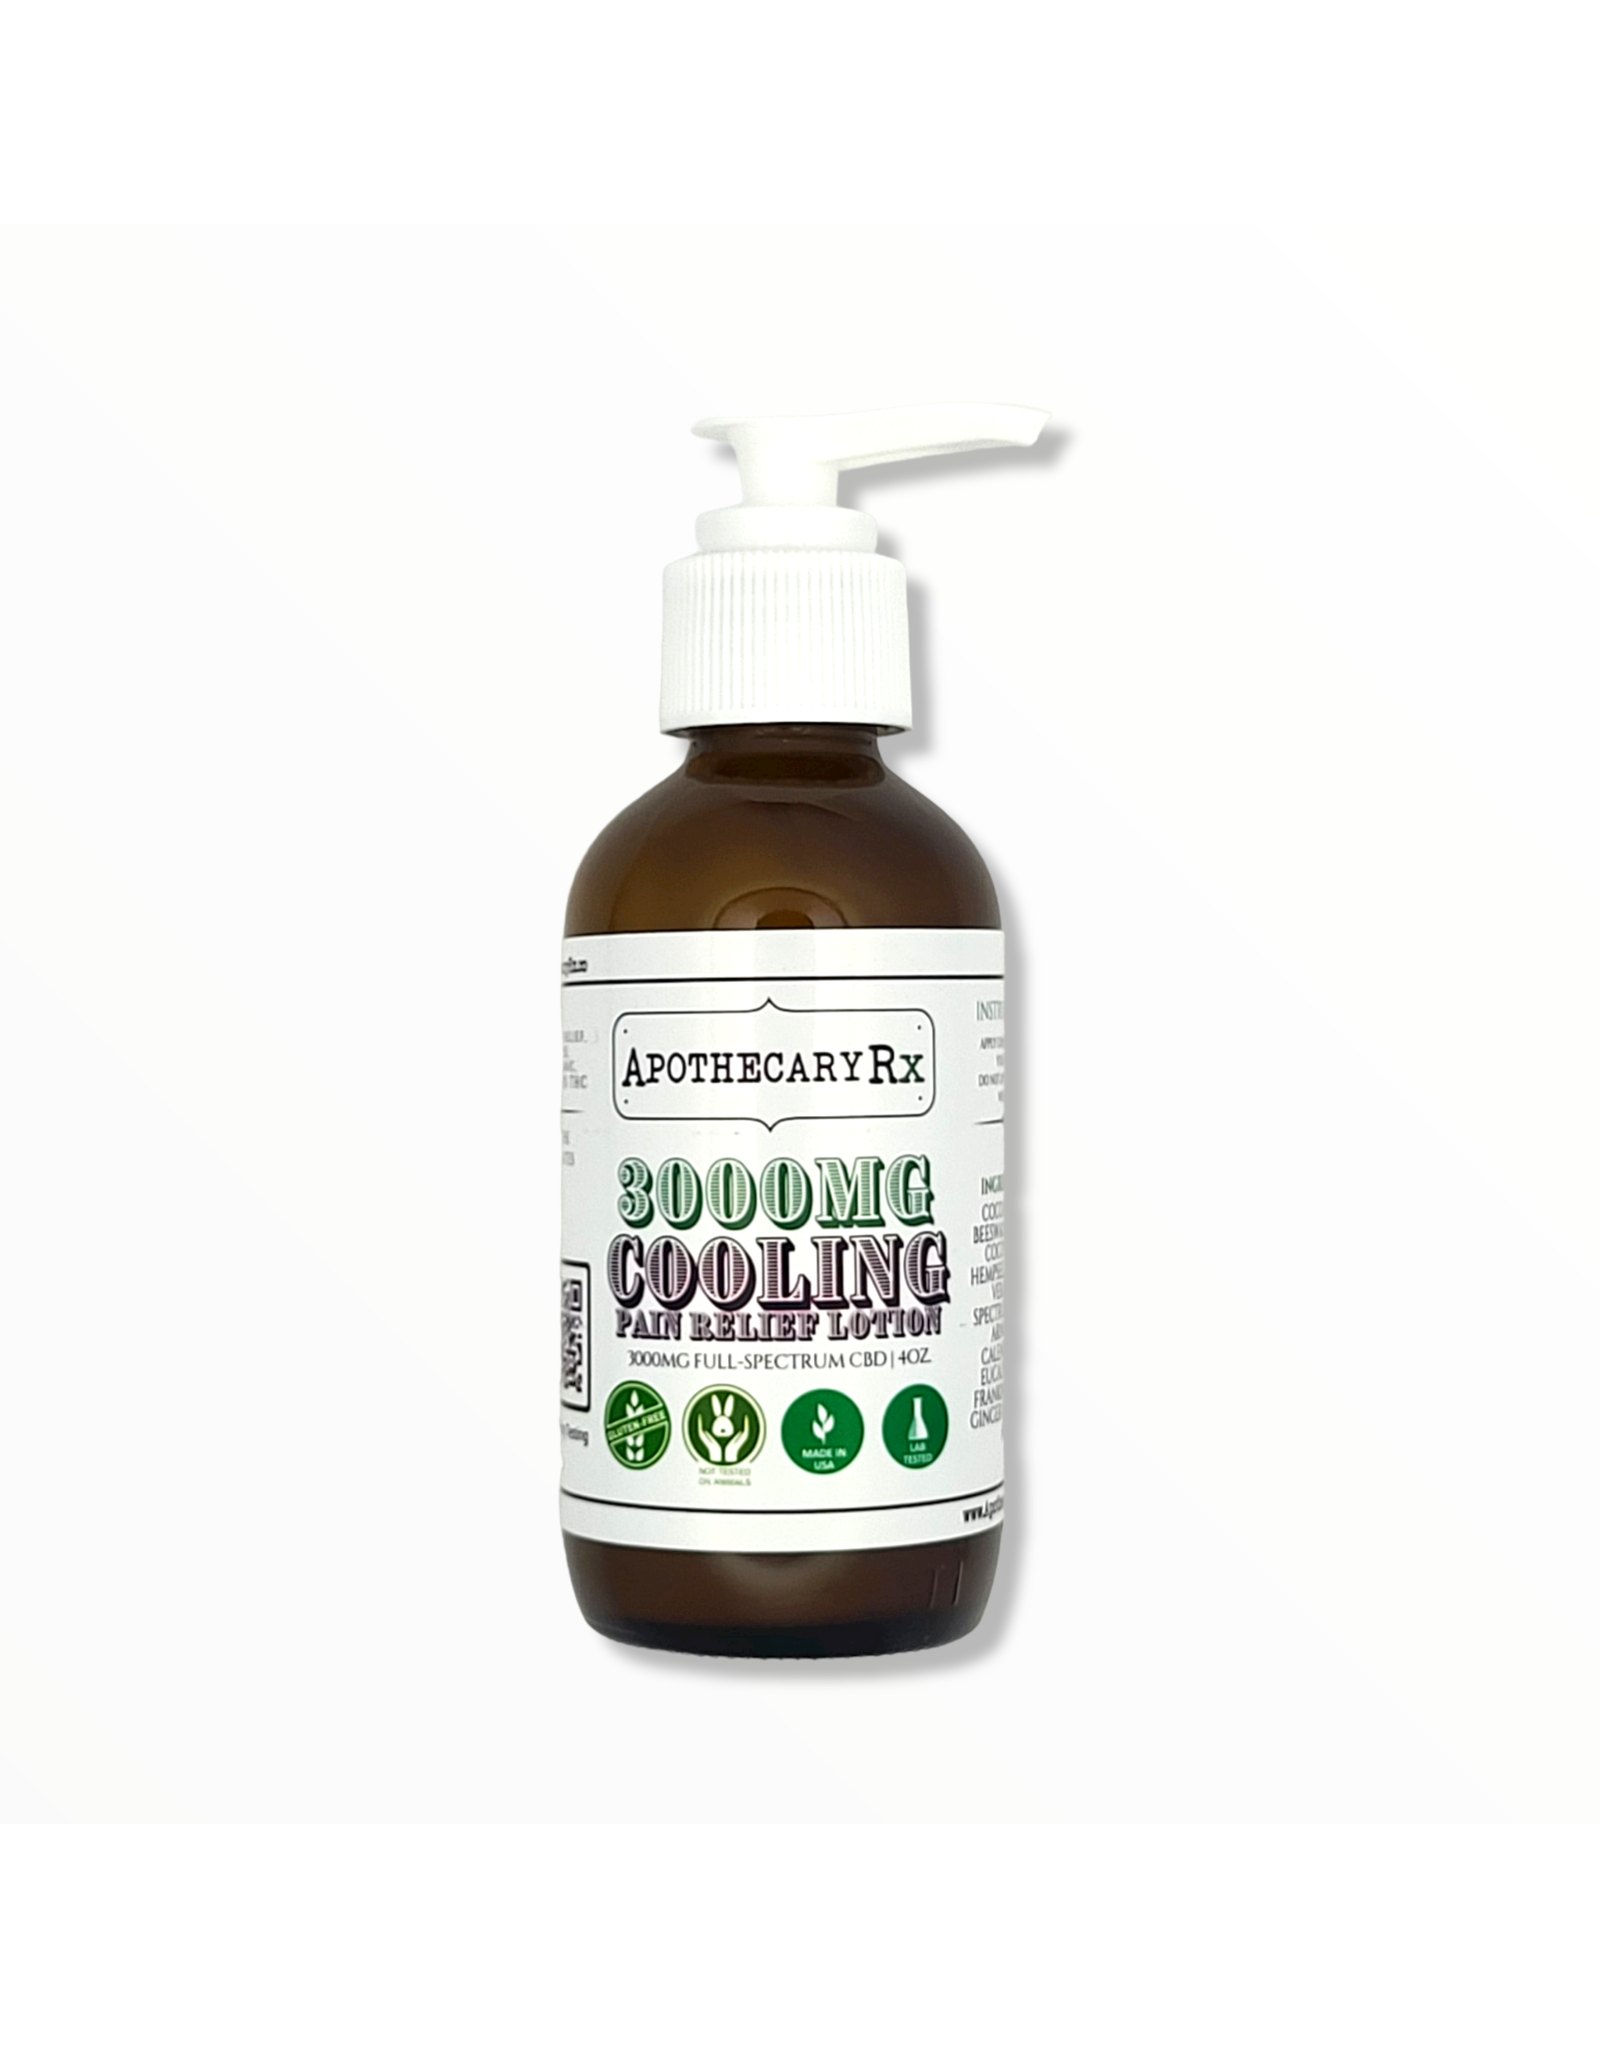 Apothecary Rx Apothecary Rx Cooling Lotion 3000mg 4oz